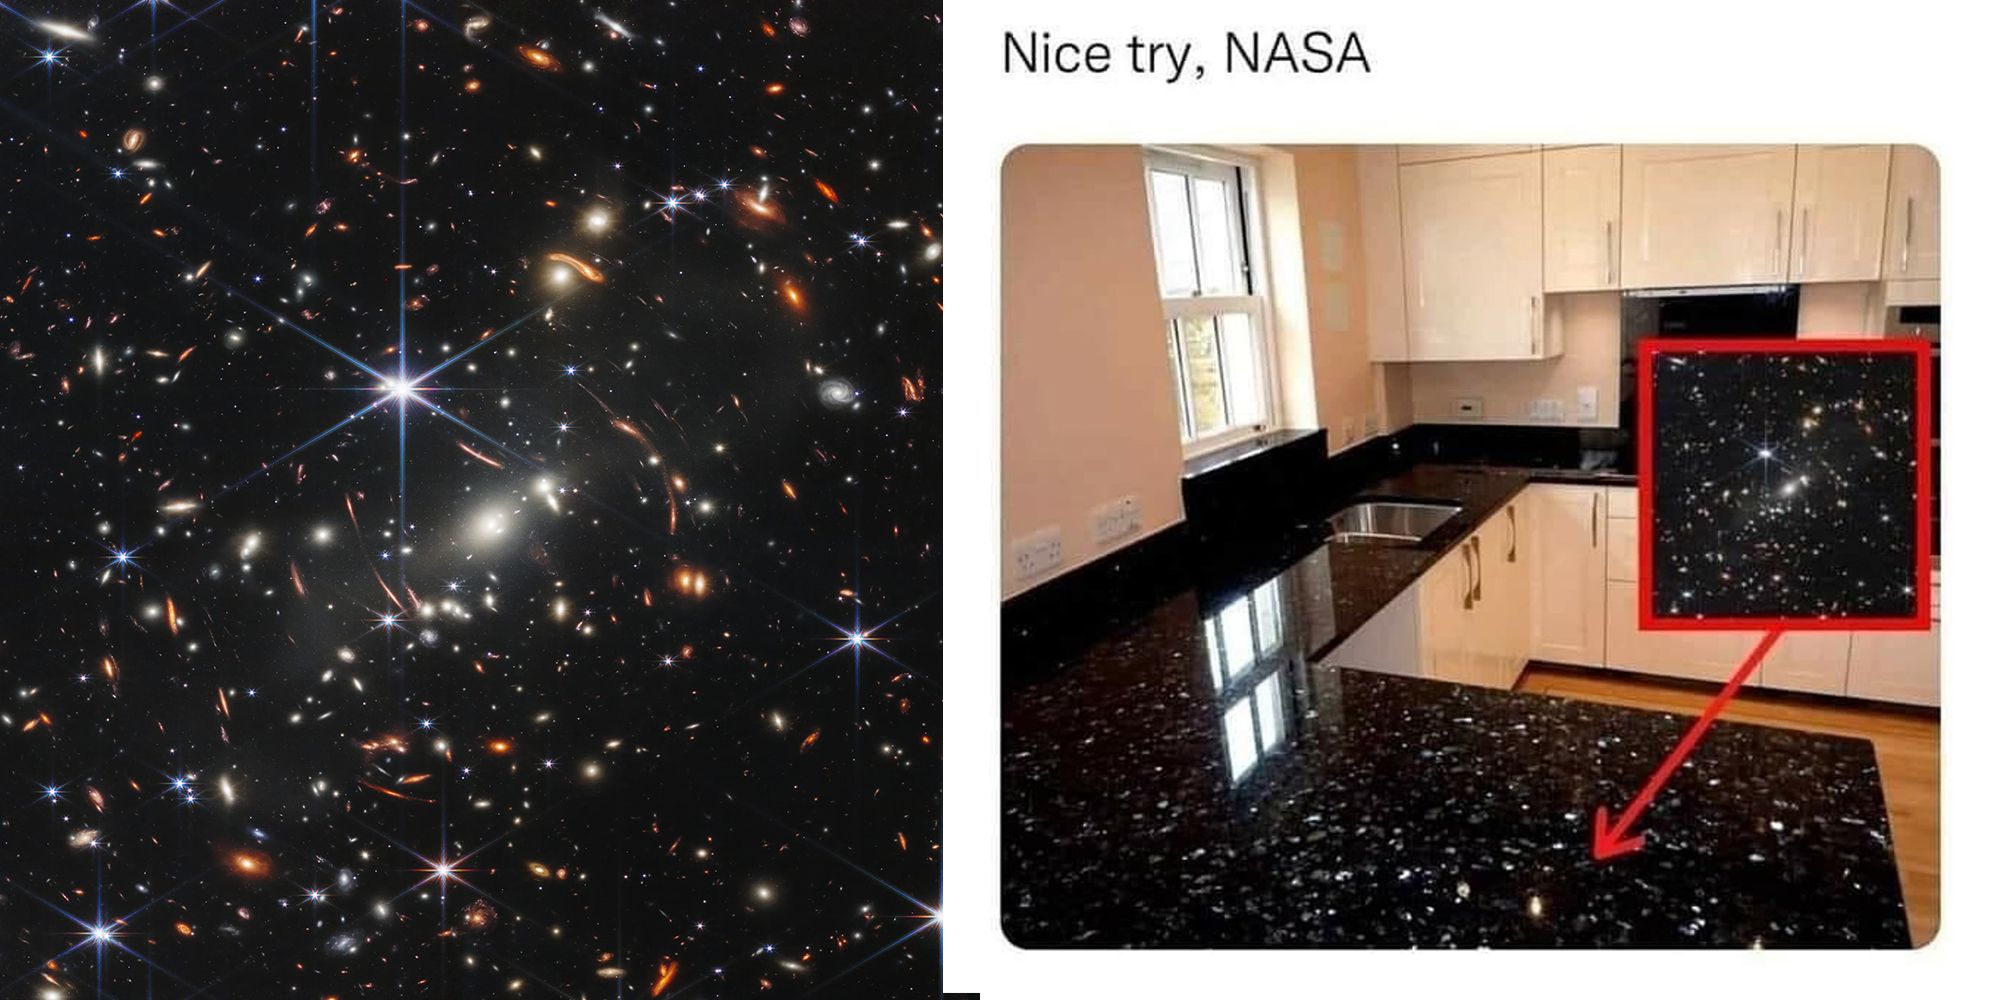 Split image of the Deep Field and a meme about James Webb Telescope.